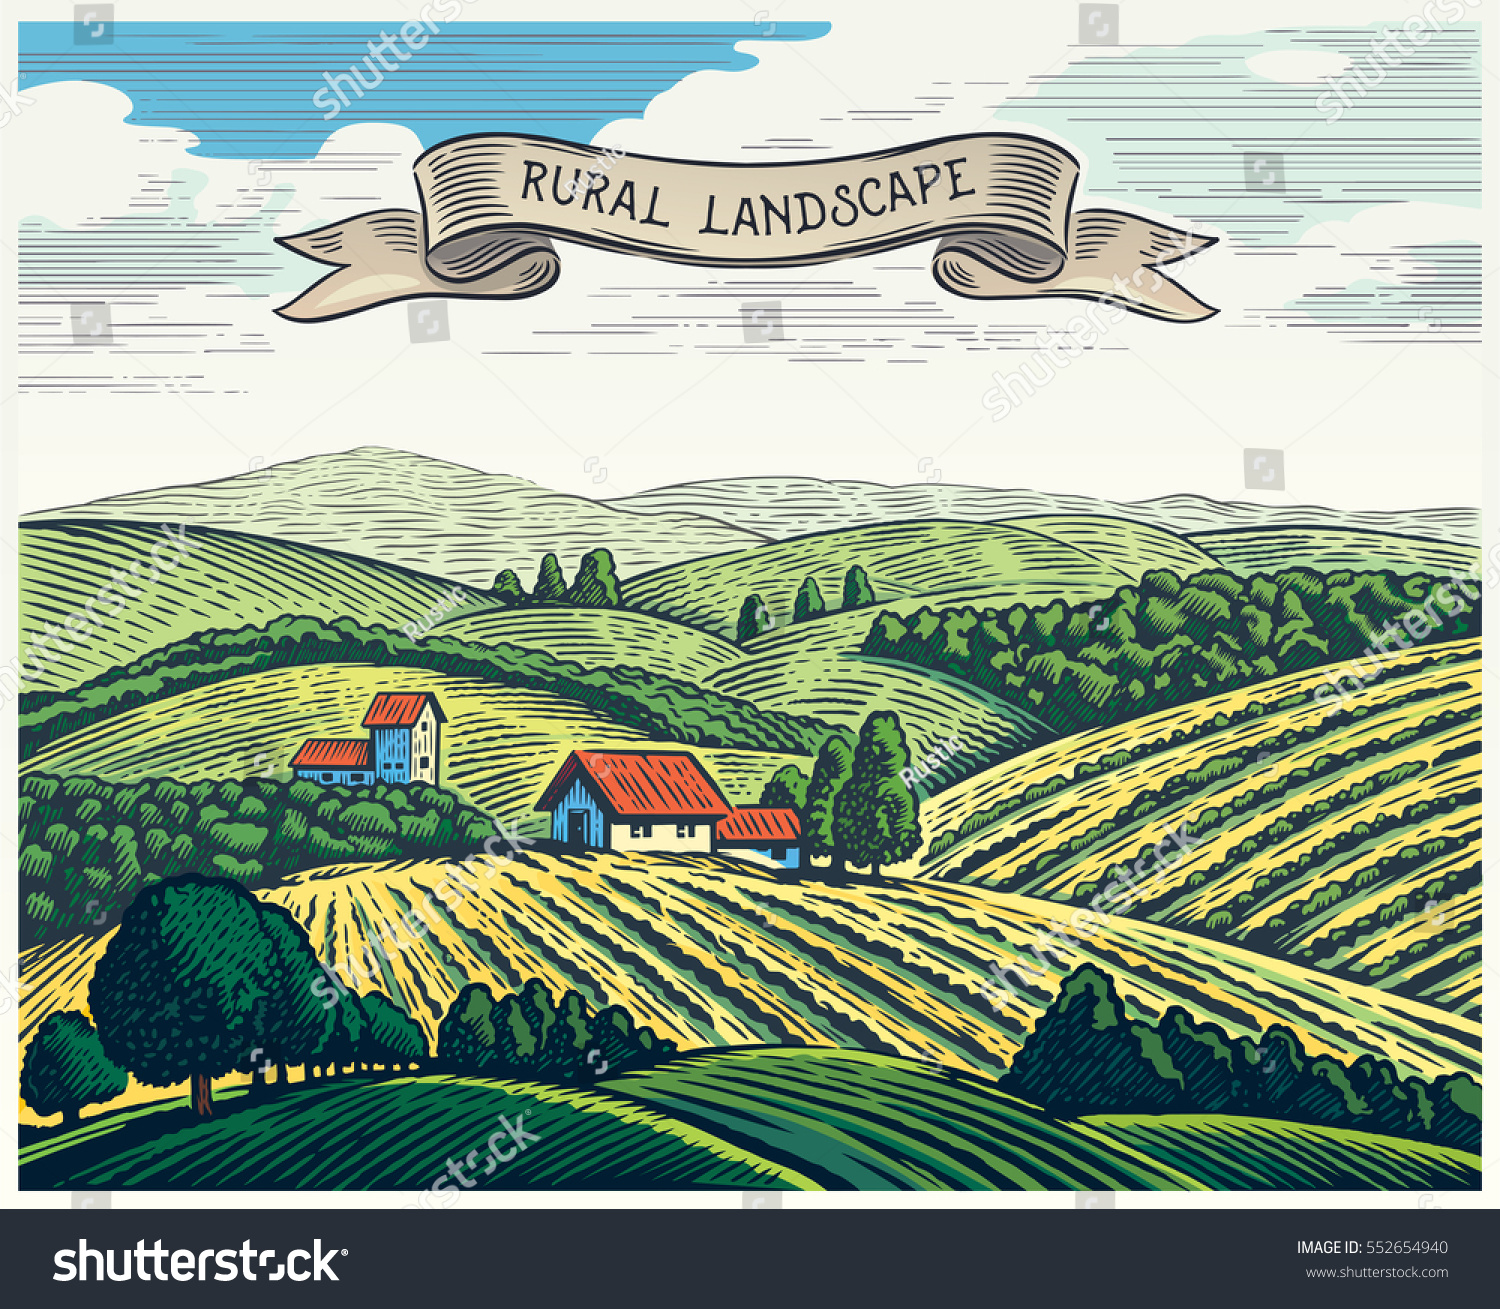 Rural landscape in graphical style, imitating the engraving. Hand drawn and converted to vector Illustration. #552654940